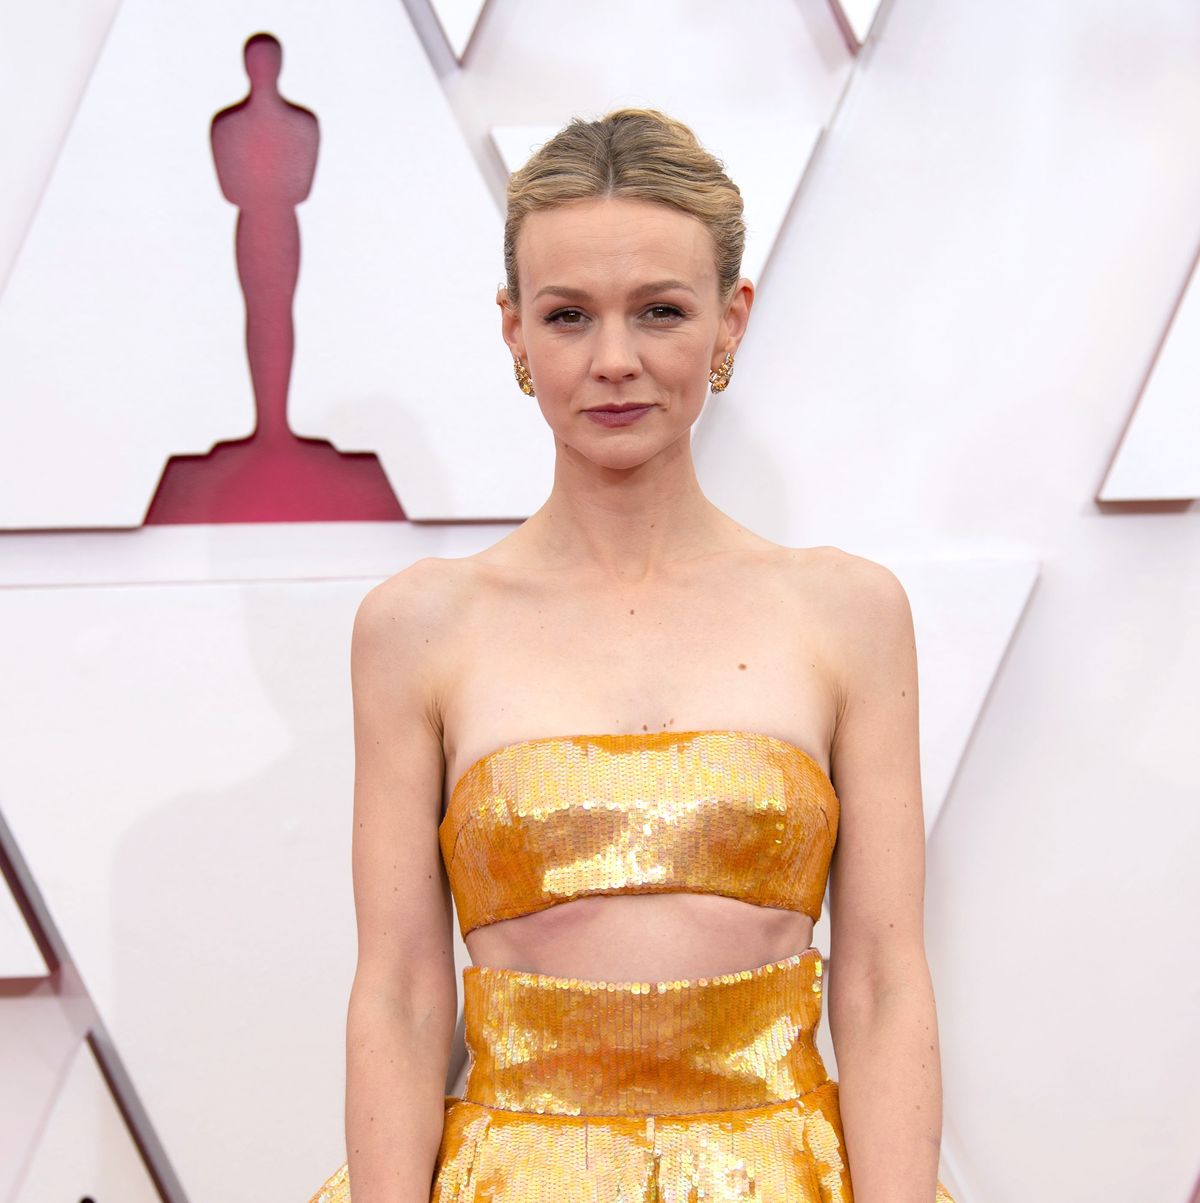 Carey Mulligan Nude - A Style Guide To The Actress's Fashion Choices